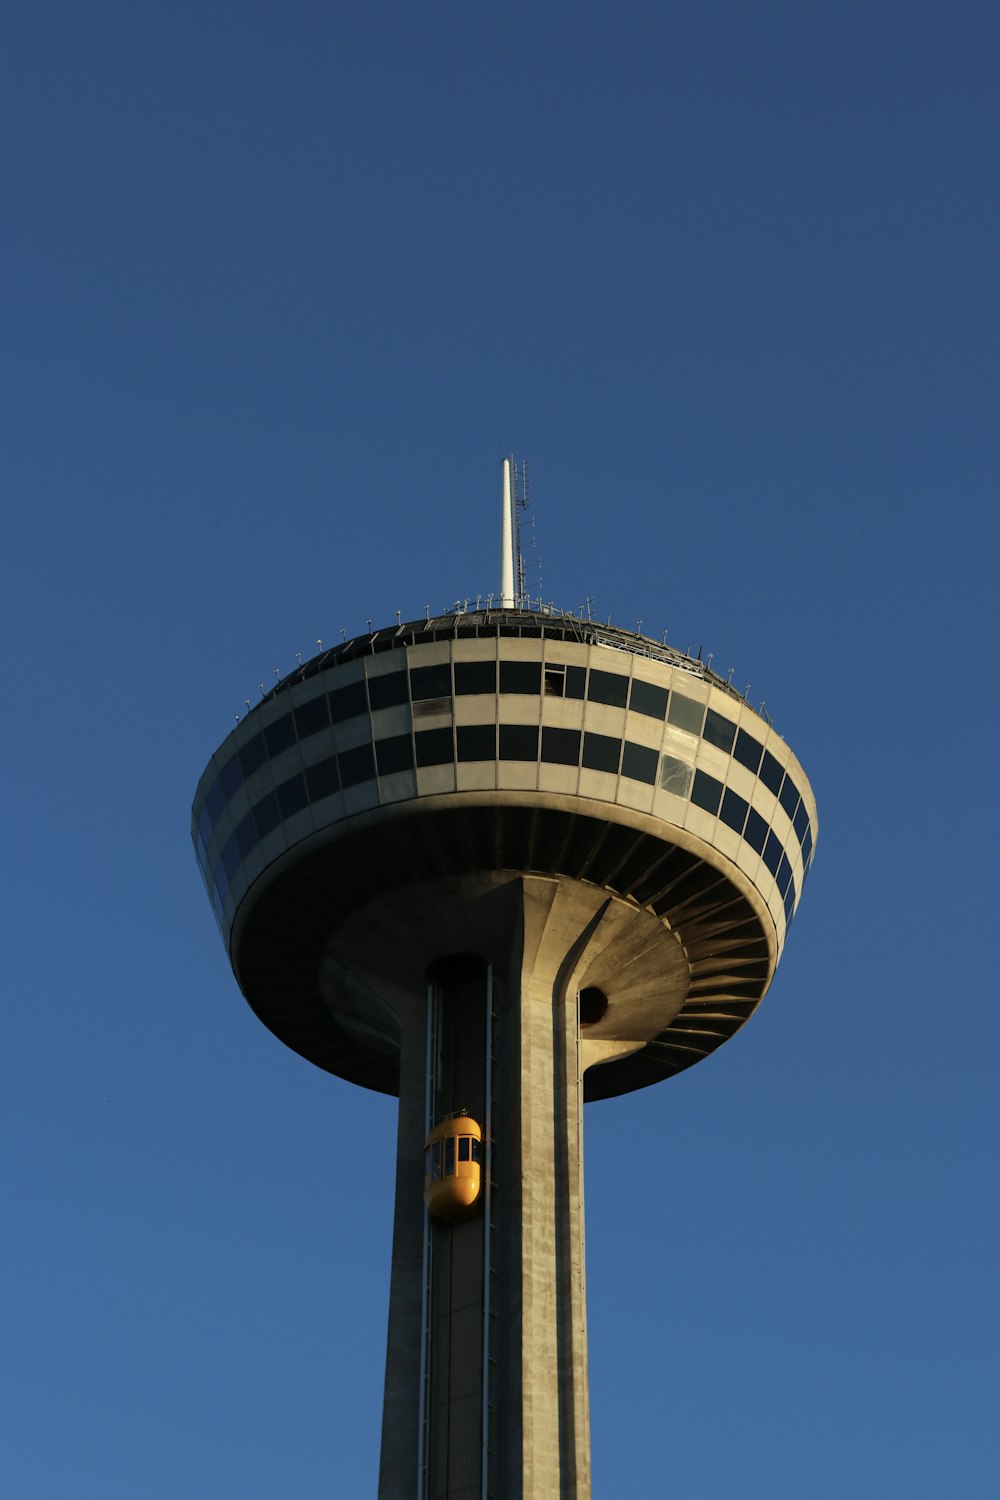 a tall tower with a round top